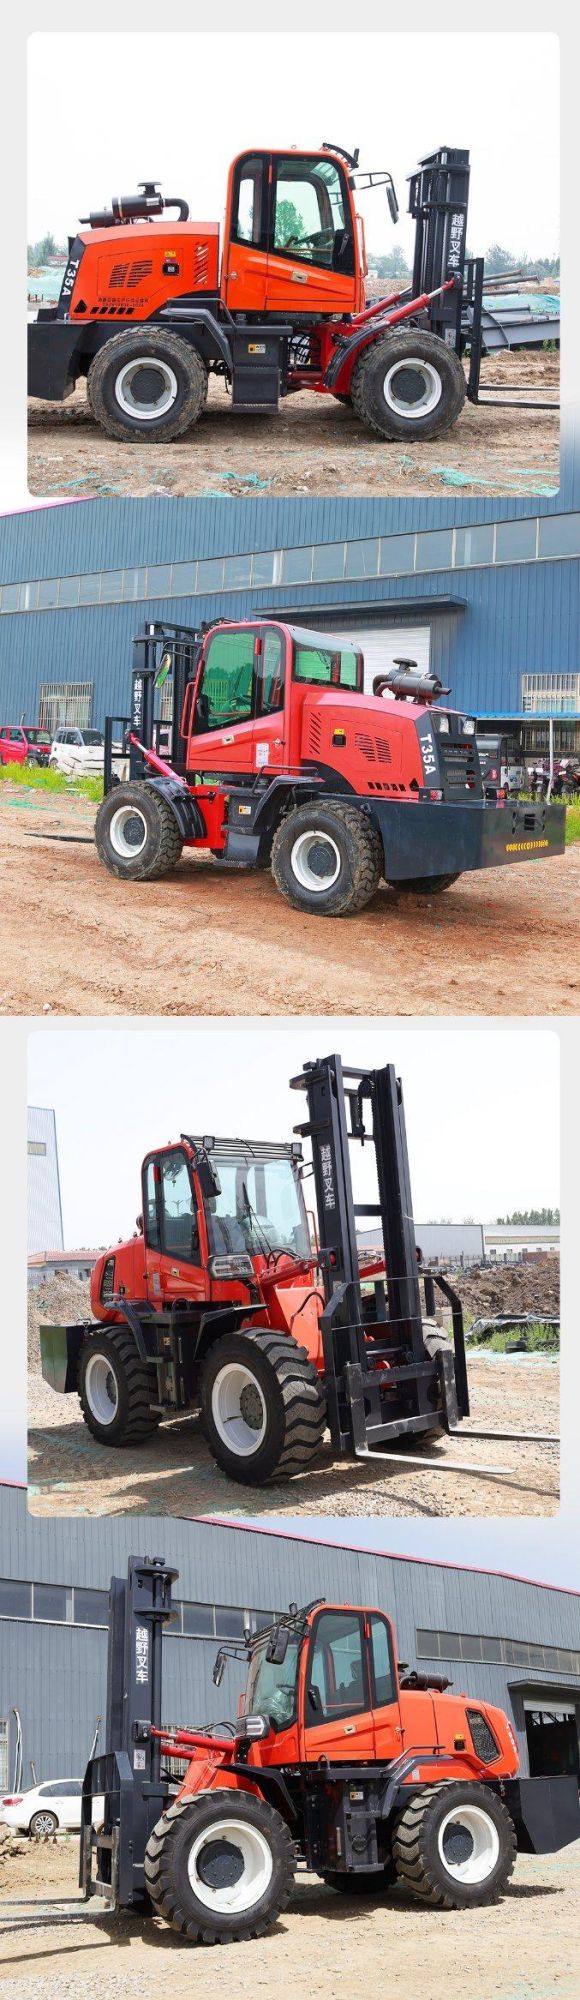 Hot in Sale All Terrian Forklift, Rough Forklift with China /Cummins/Yanmar Engine